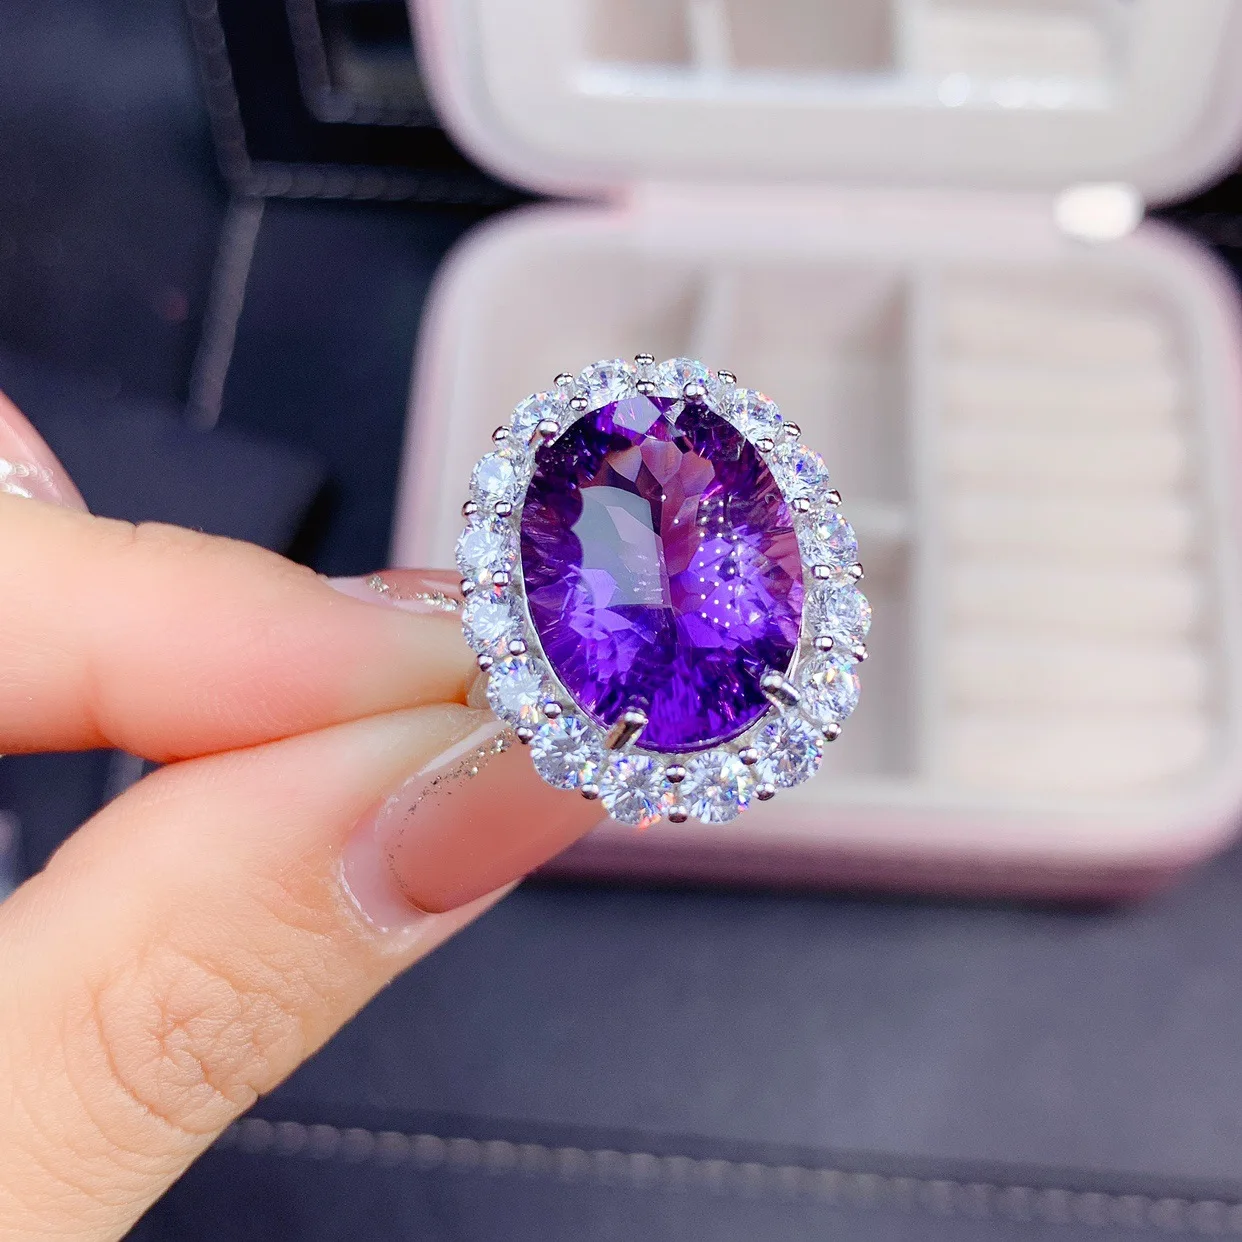 

Sparkling Light Huge Oval Imitation Purple Crystal Women Open Adjustable Size Rings with White Zircon Party Jewelry Gift